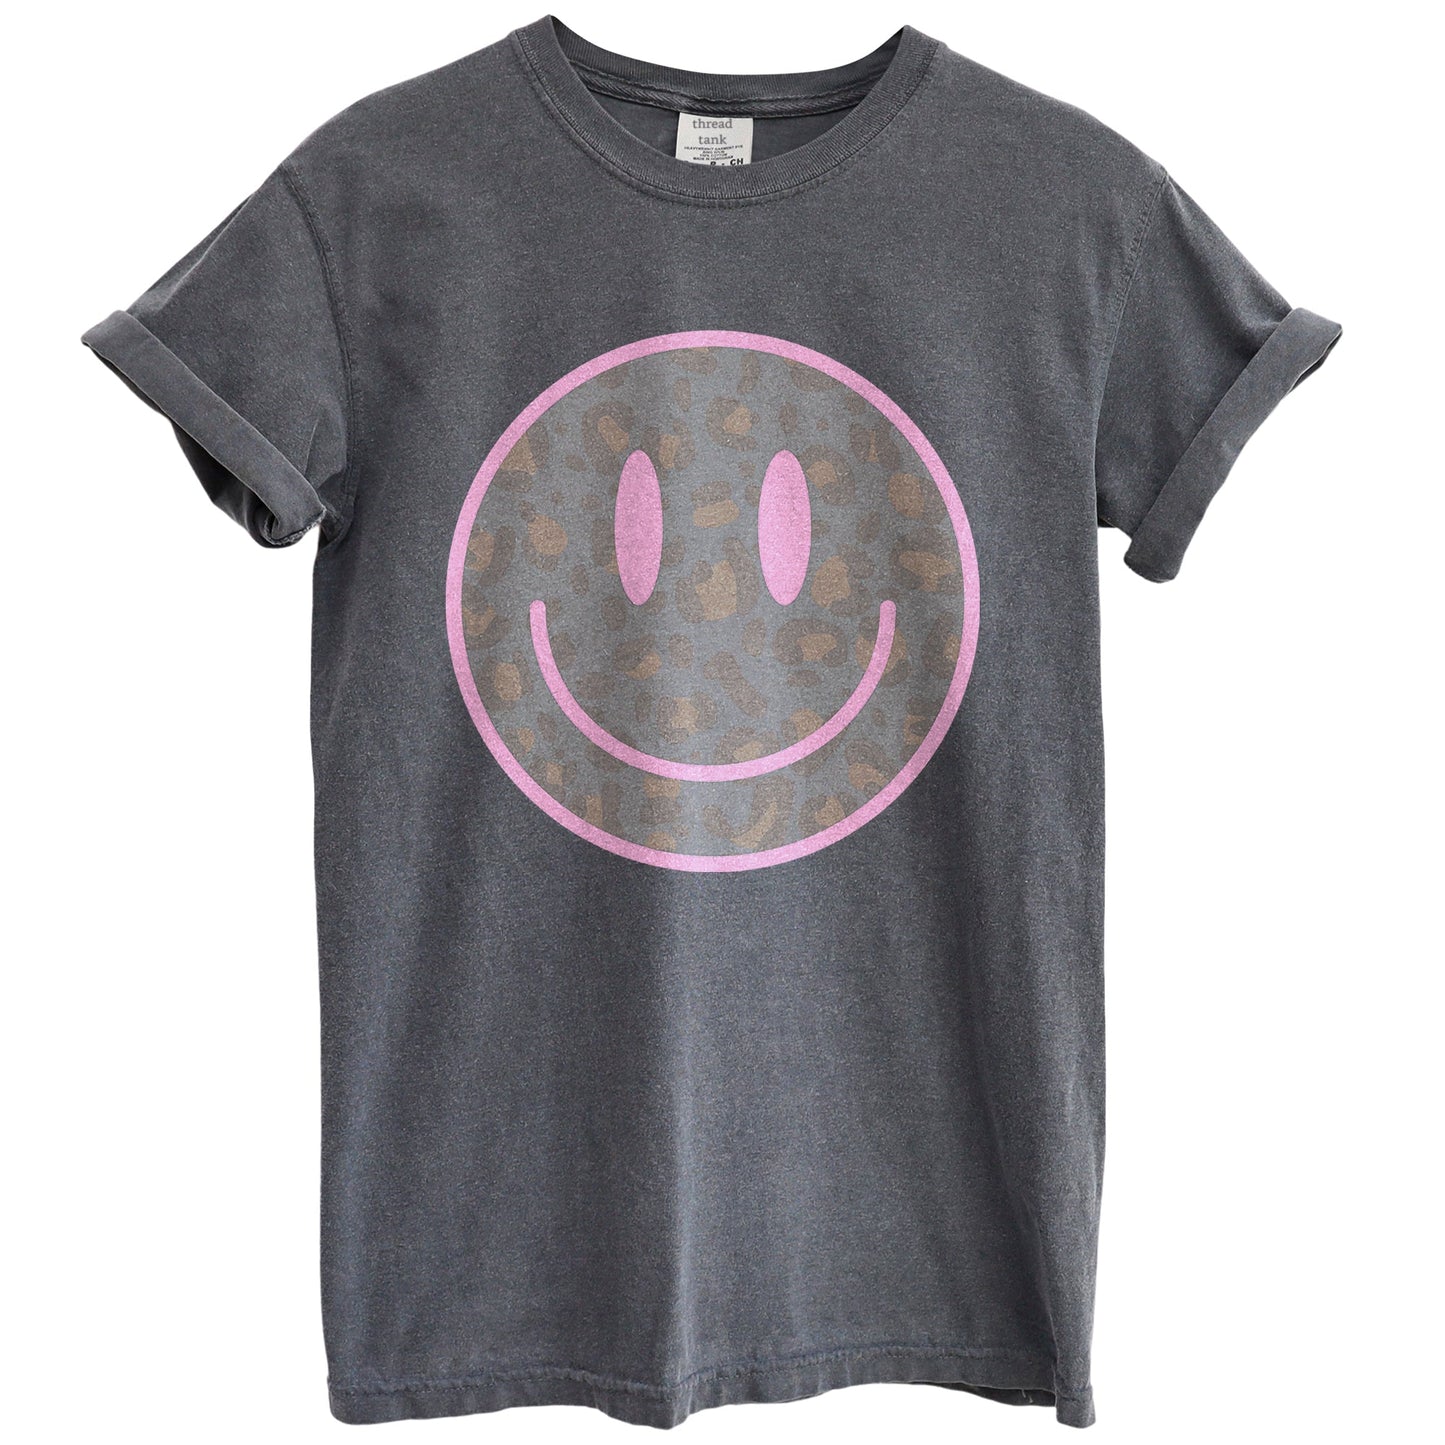 Cheetah Smiley Garment-Dyed Tee - Stories You Can Wear